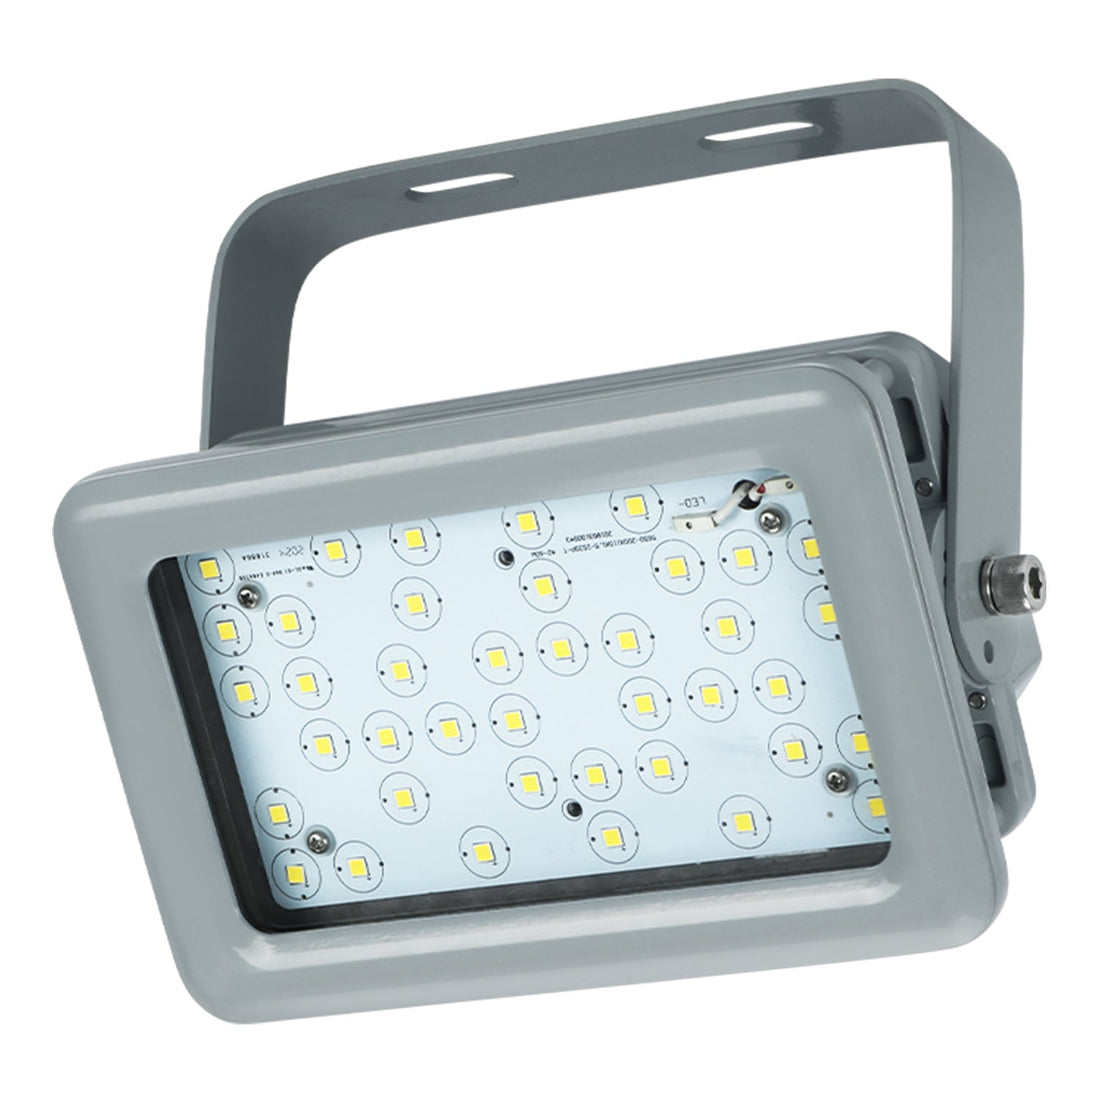 Powerful and Safe Lighting Solution for Hazardous Environments: 300W LED Explosion-Proof Lighting - Dimmable, 5000K, 42000LM, IP66 Rated, Ideal for Oil &amp; Gas Refineries, Drilling Rigs, Petrochemical Facilities